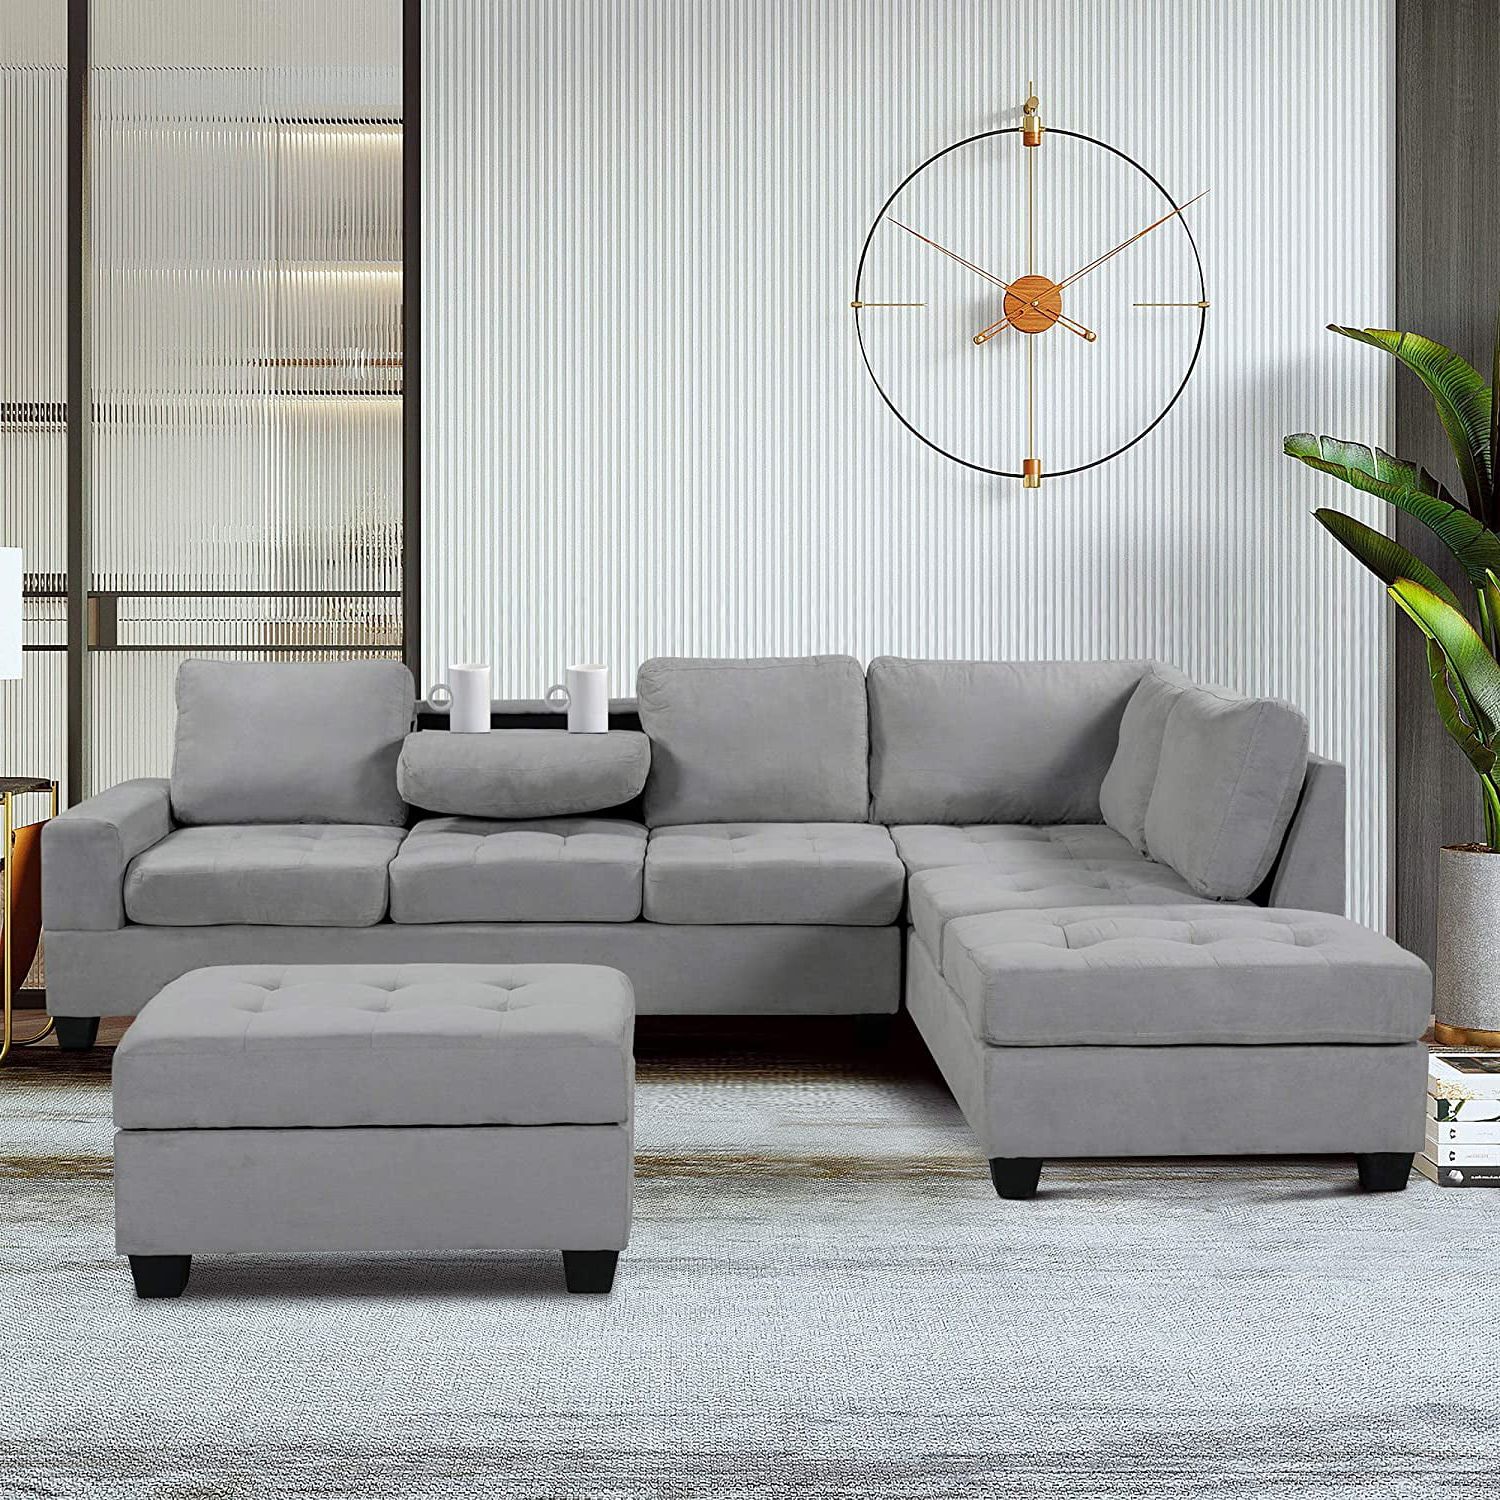 Most Current L Shape Couches With Reversible Chaises Throughout 3 Piece Convertible Sectional Sofa L Shaped Couch With Reversible (View 2 of 15)